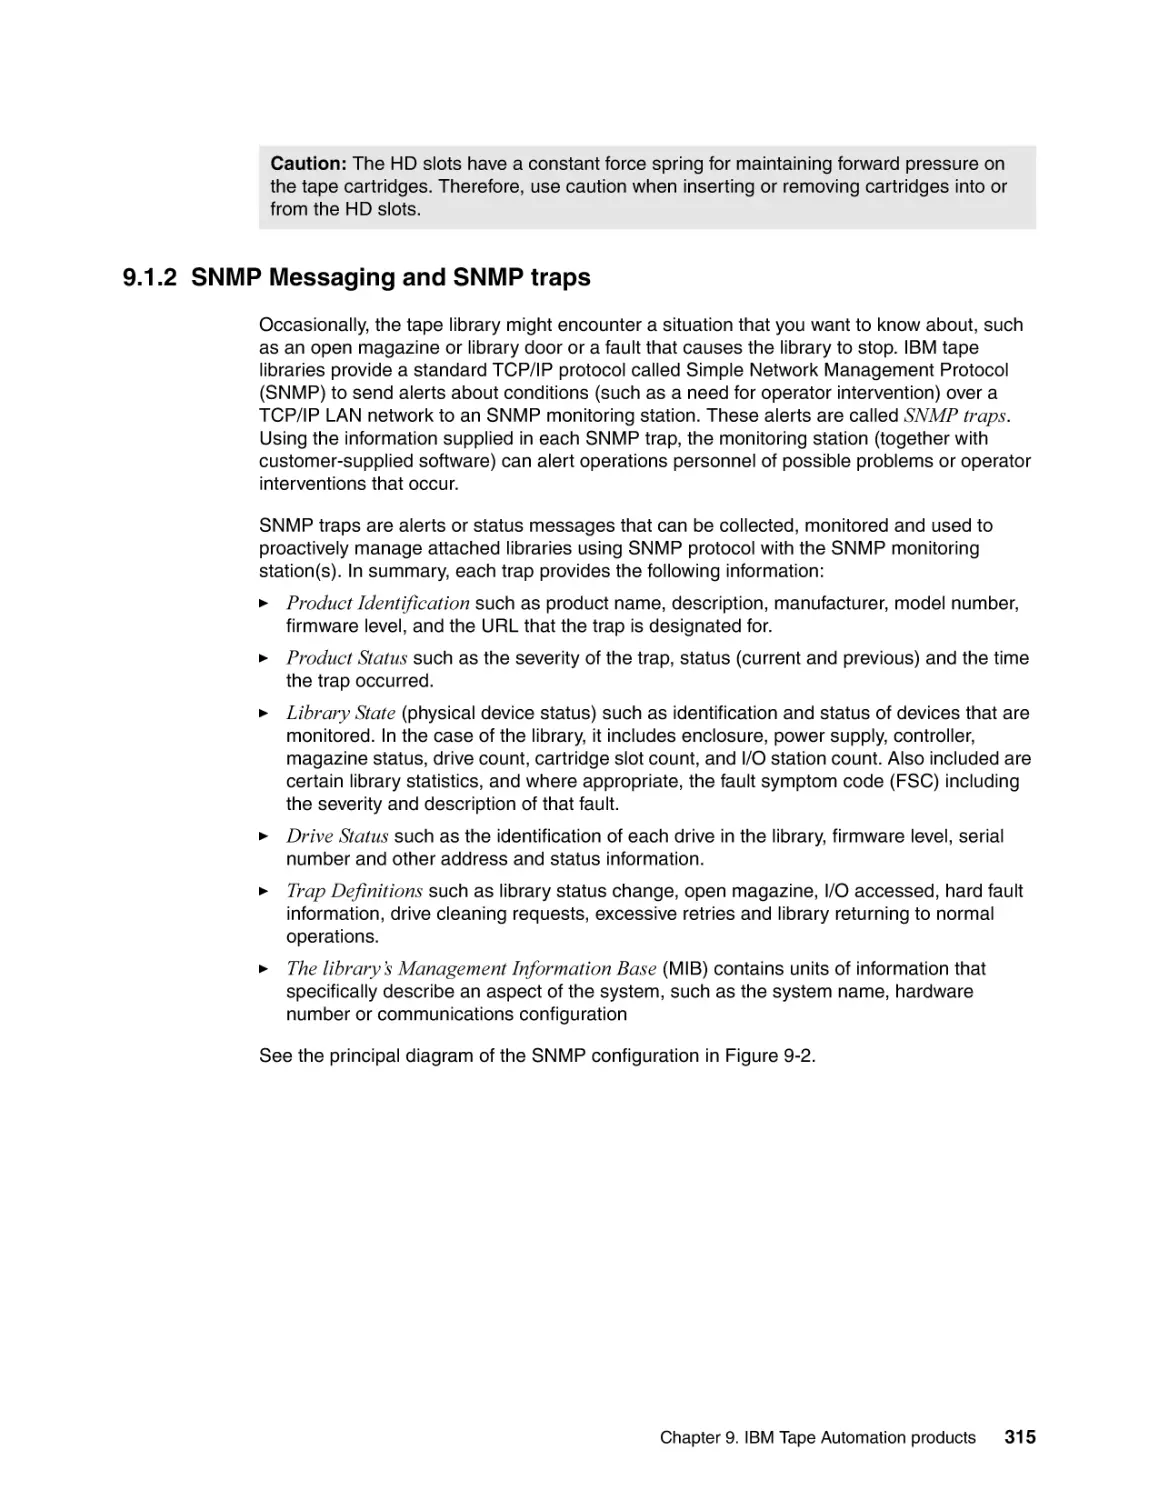 9.1.2 SNMP Messaging and SNMP traps